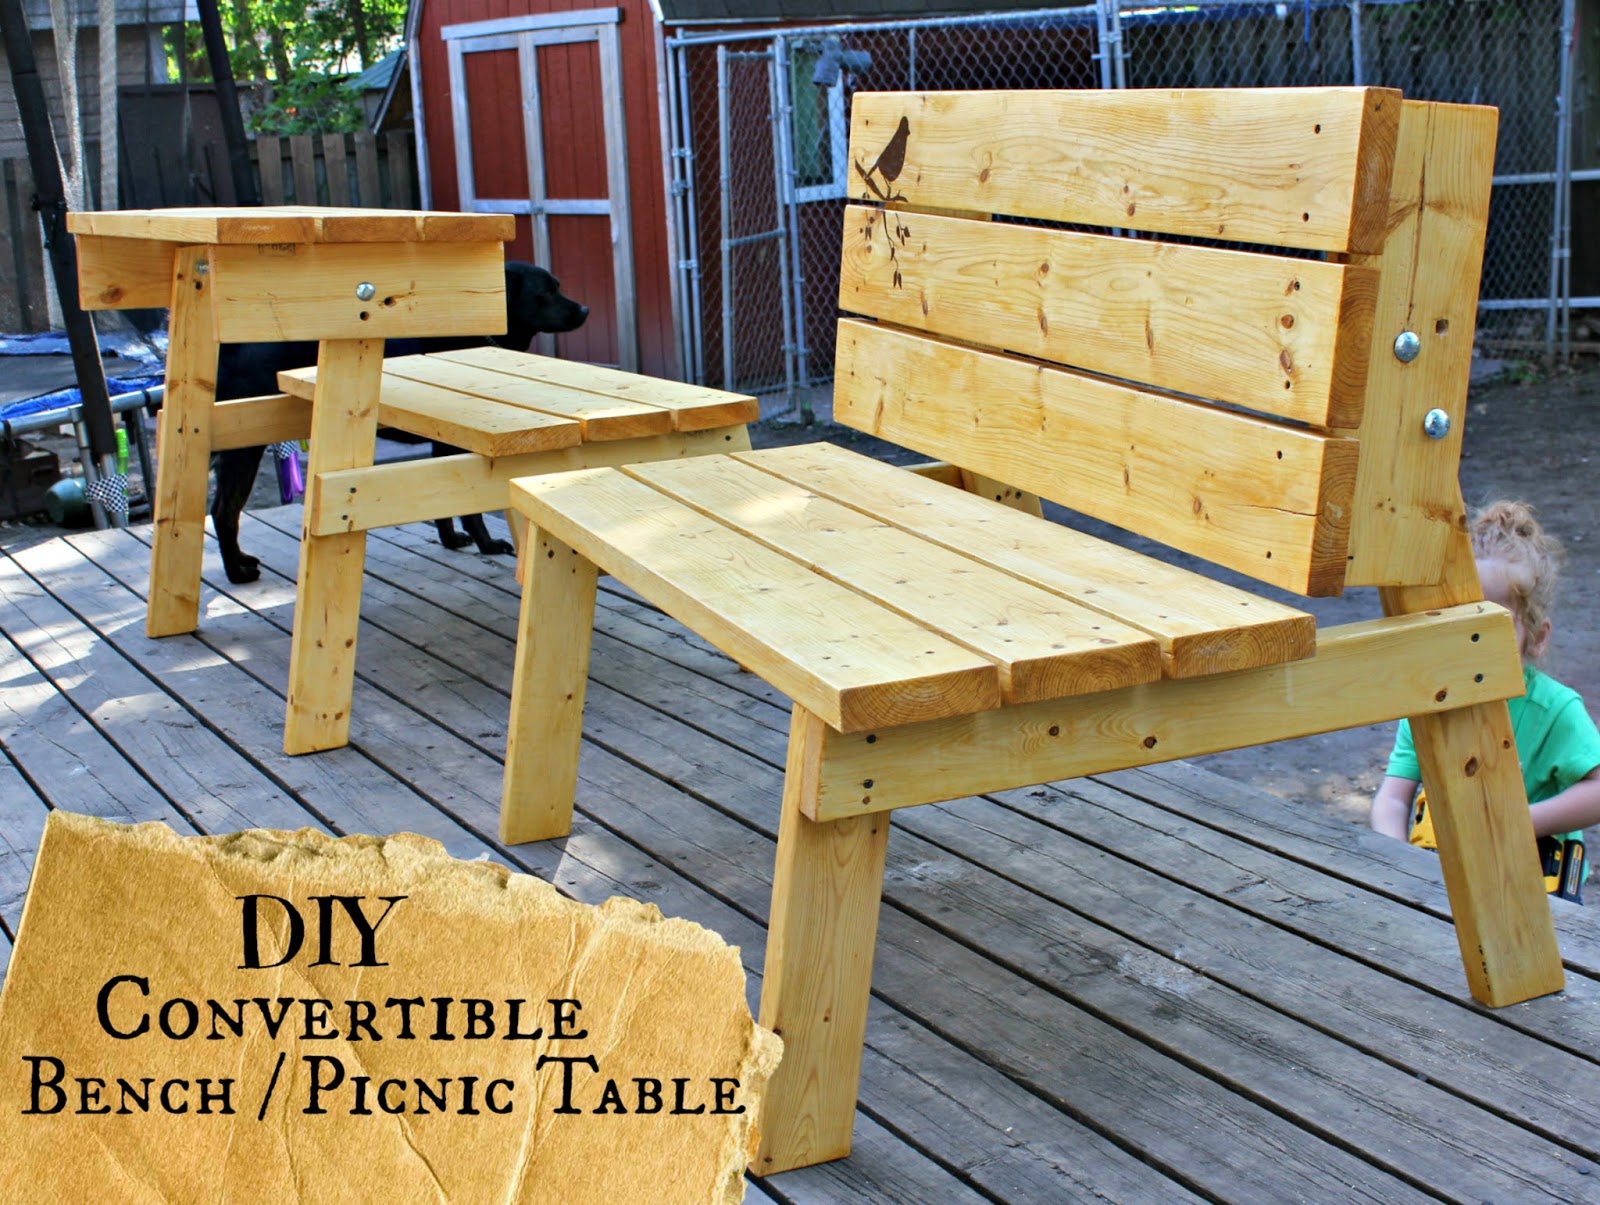 The Good Kind of Crazy: Convertible Bench/Picnic Table you 